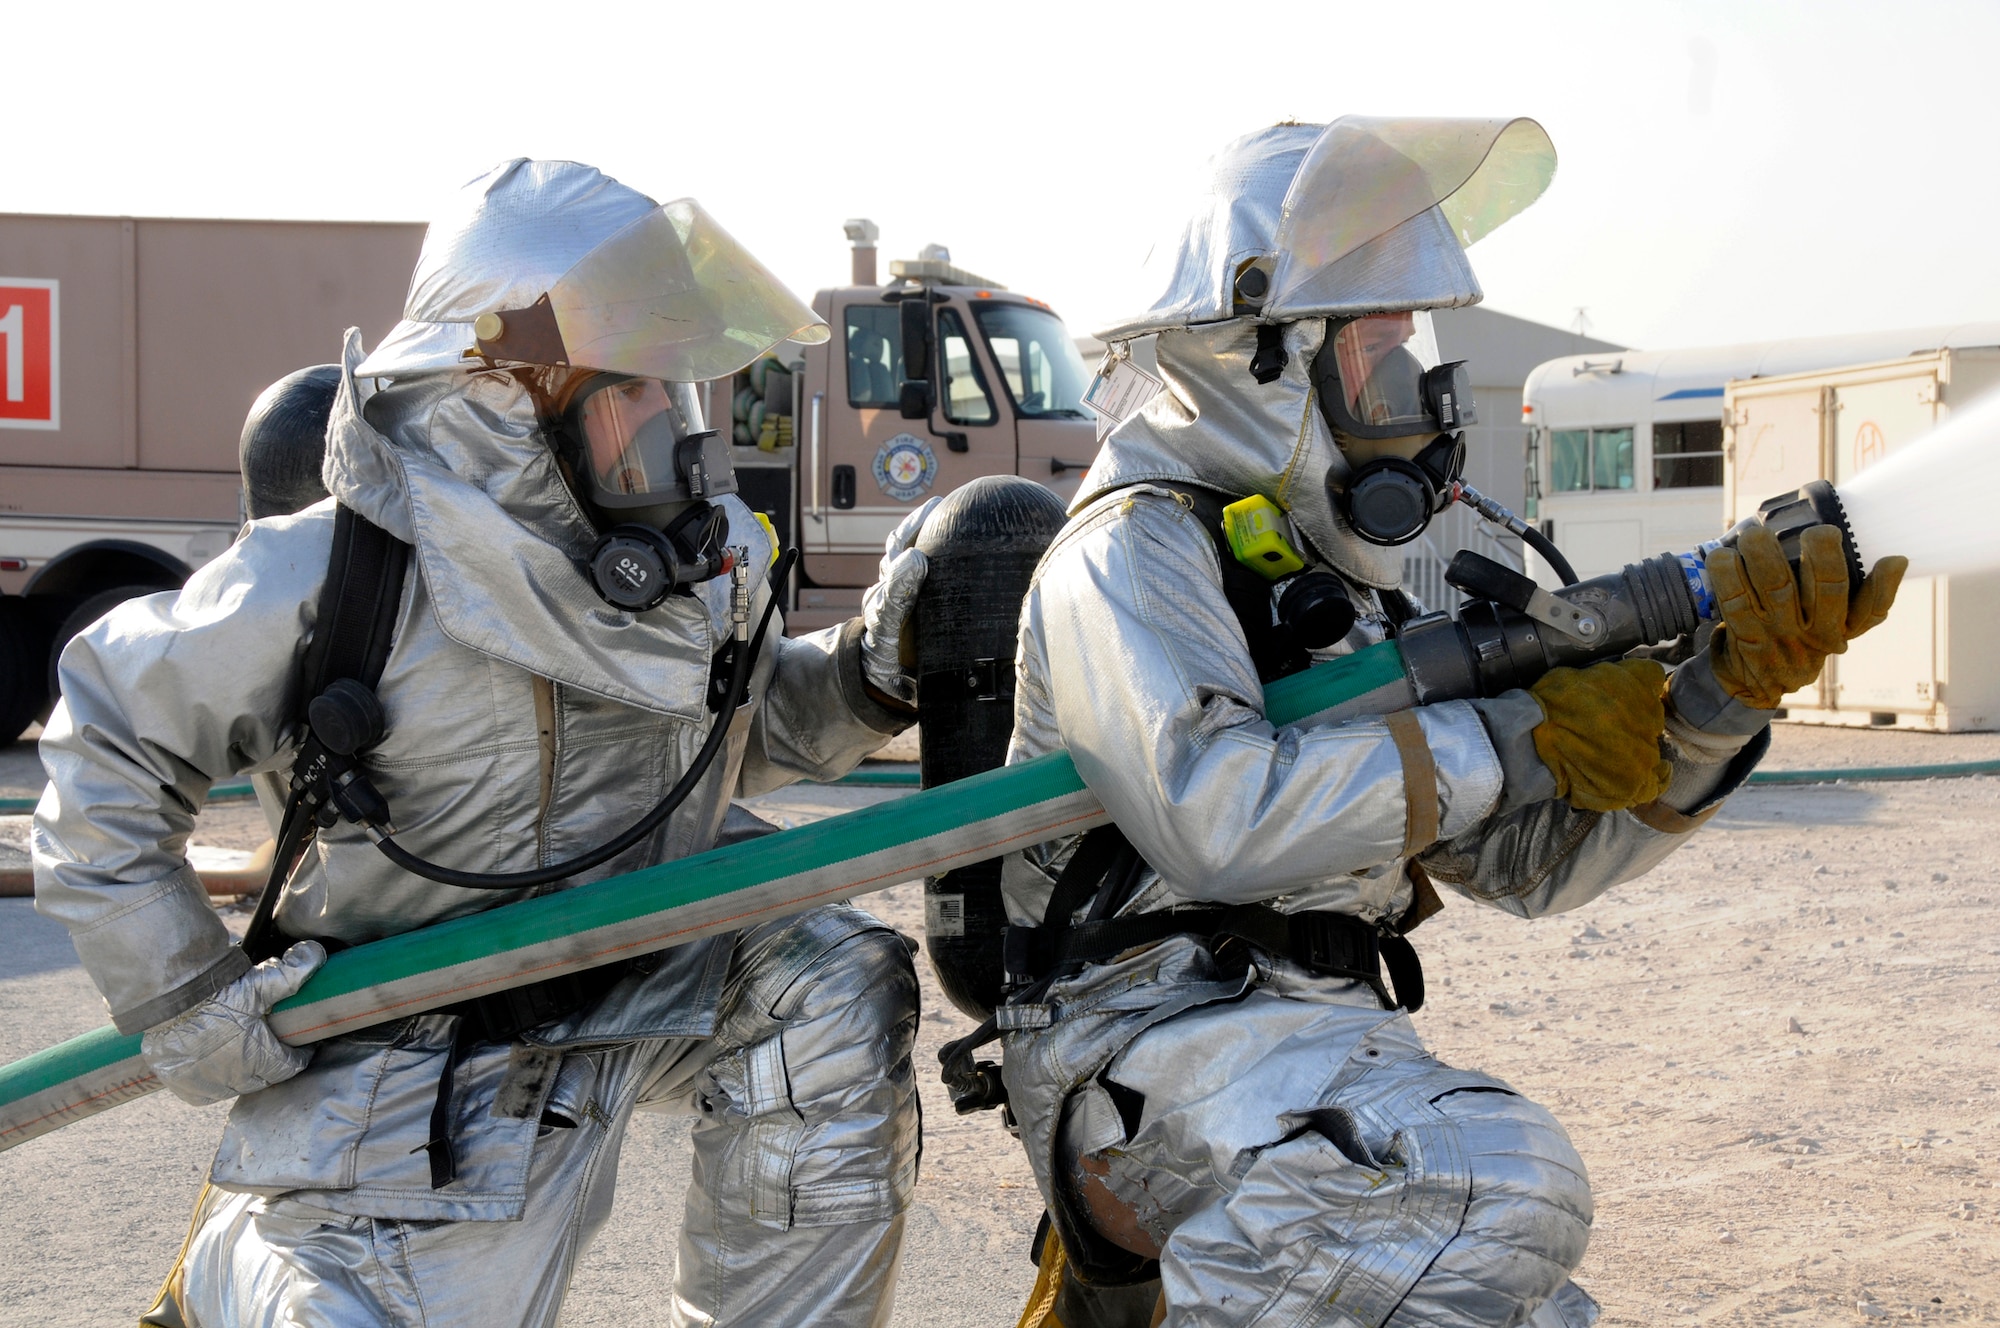 Tech. Sgt. Peter W. Peterson, firefighter crew chief, and Airman 1st Class Zachary Kuiper, firefighter lineman, both assigned to the 379th Expeditionary Civil Engineer Squadron, spray their hose in normal defensive attack as part of crew proficiency training Nov. 20, at an undisclosed air base in Southwest Asia. Daily crew proficiency training ensures these ECES members are prepared for any situation.  Sergeant Peterson, a native of Minneapolis, Minn., is deployed from Whiteman AFB, Mo., and Airman Kuiper, a native of Orlando, Fla., is deployed from Tyndall AFB Fla.  Both are deployed in support of Operations Iraqi and Enduring Freedom and Joint Task Force-Horn of Africa. (U.S. Air Force photo by Staff Sgt. Darnell T. Cannady/Released)